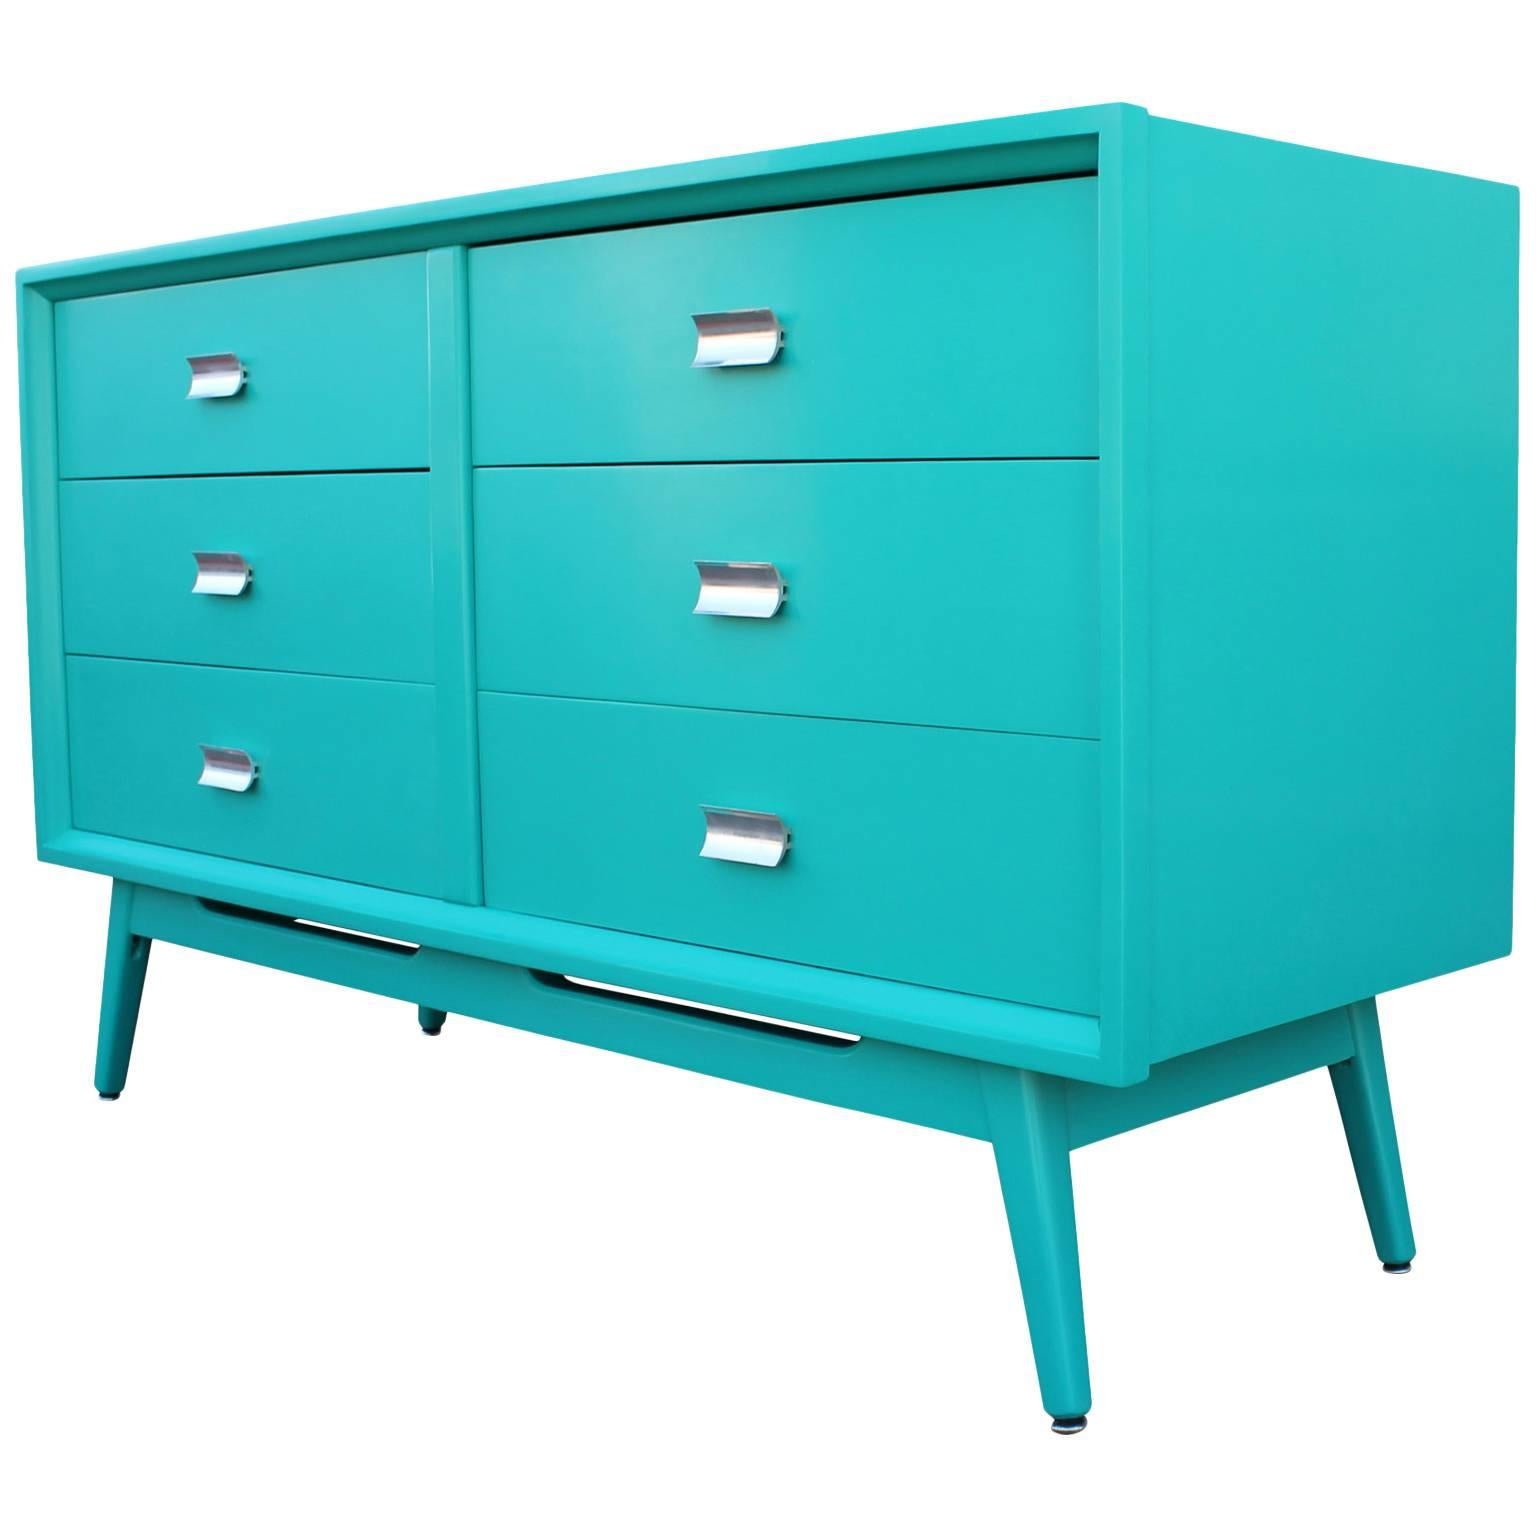 Modern Turquoise Lacquered Six Drawer Dresser with Chrome Hardware